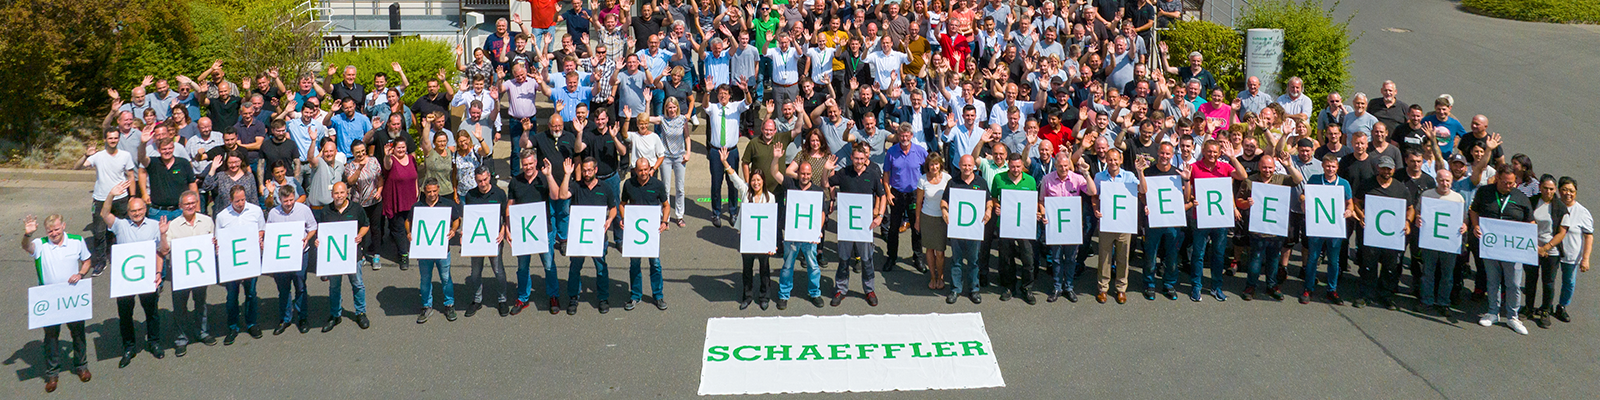 shuffler employees holding up signs